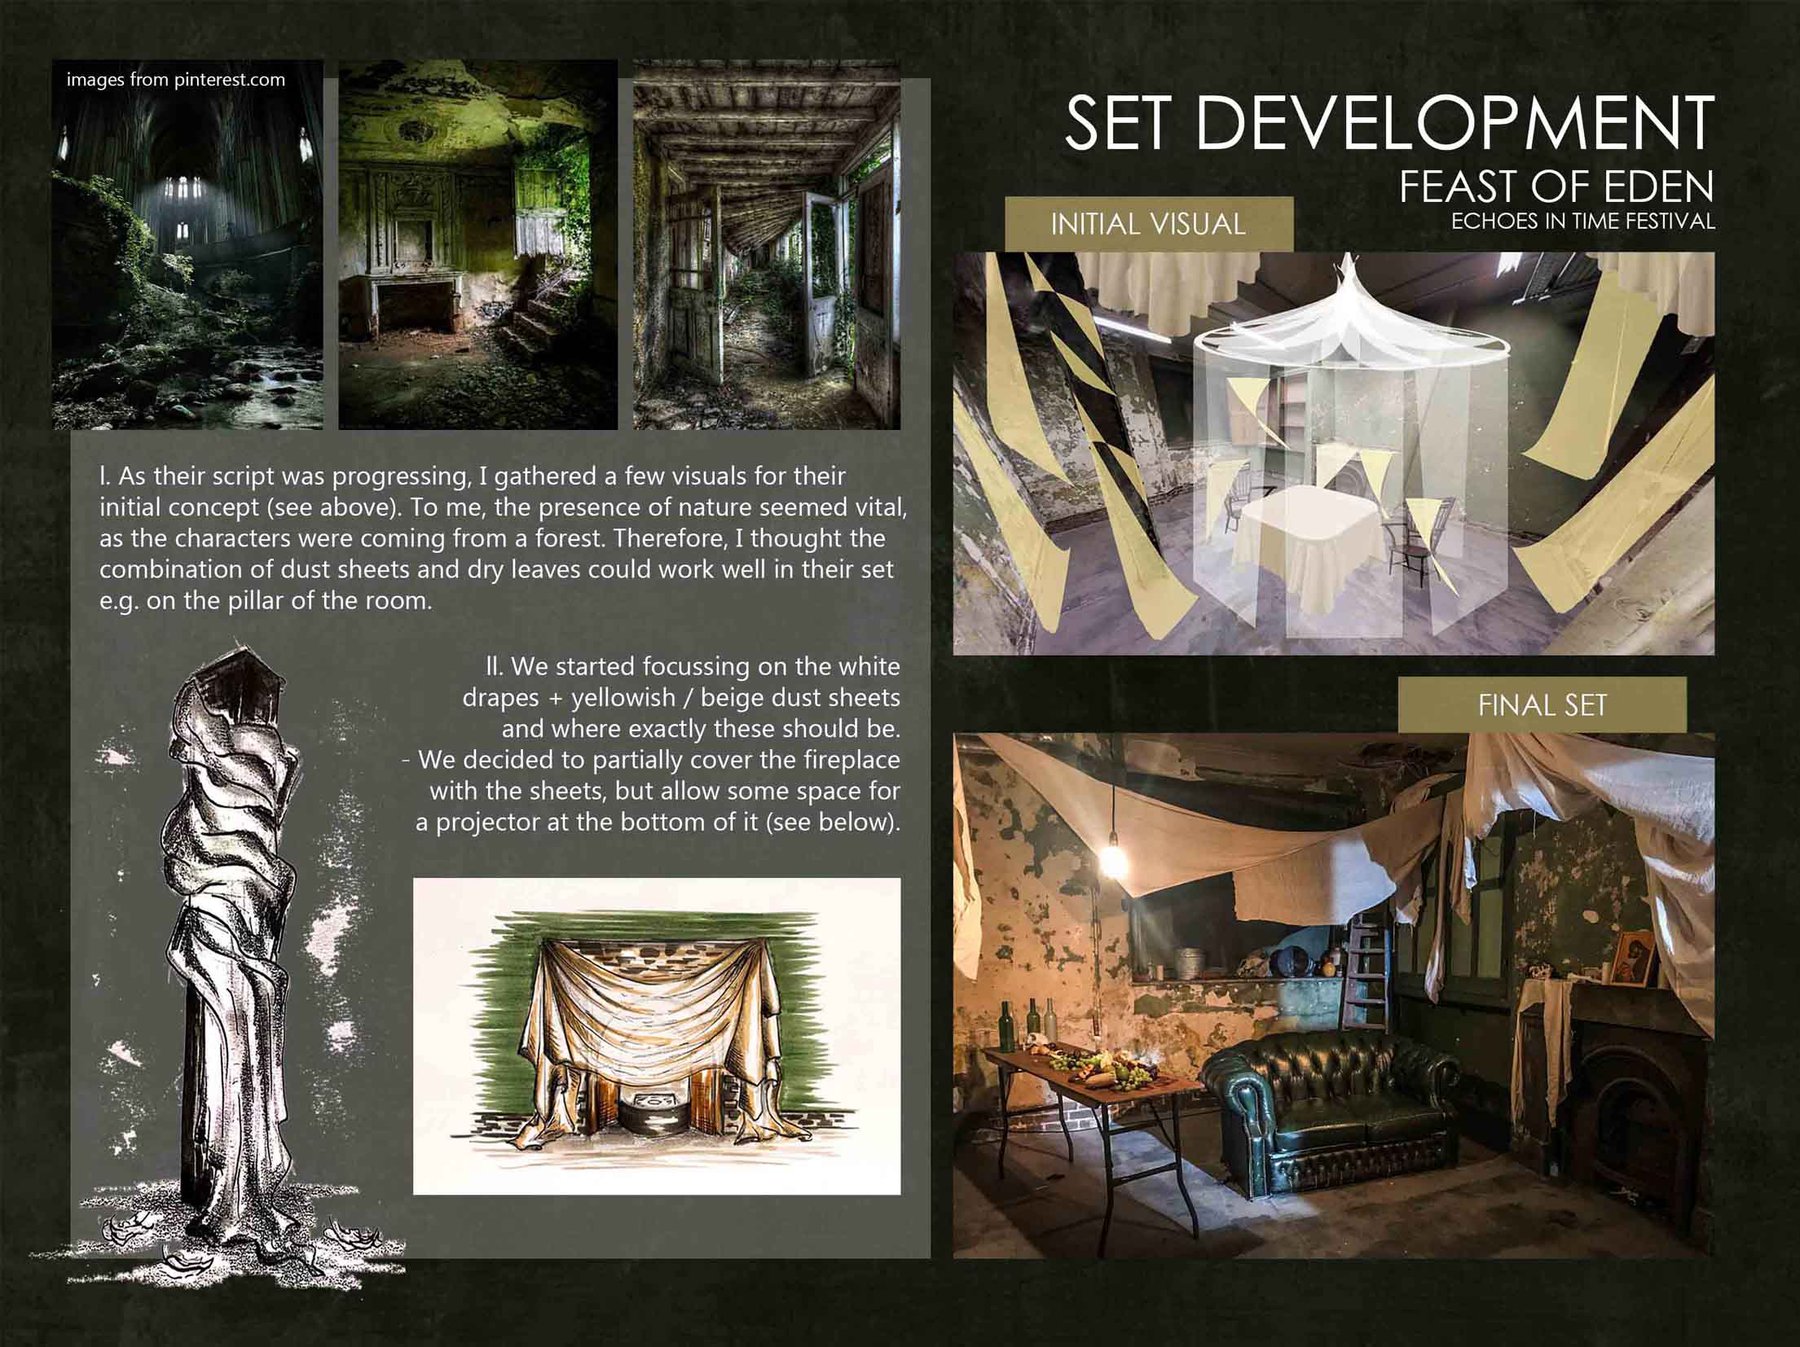 Set development and its final outcome for the festival piece Feast of Eden